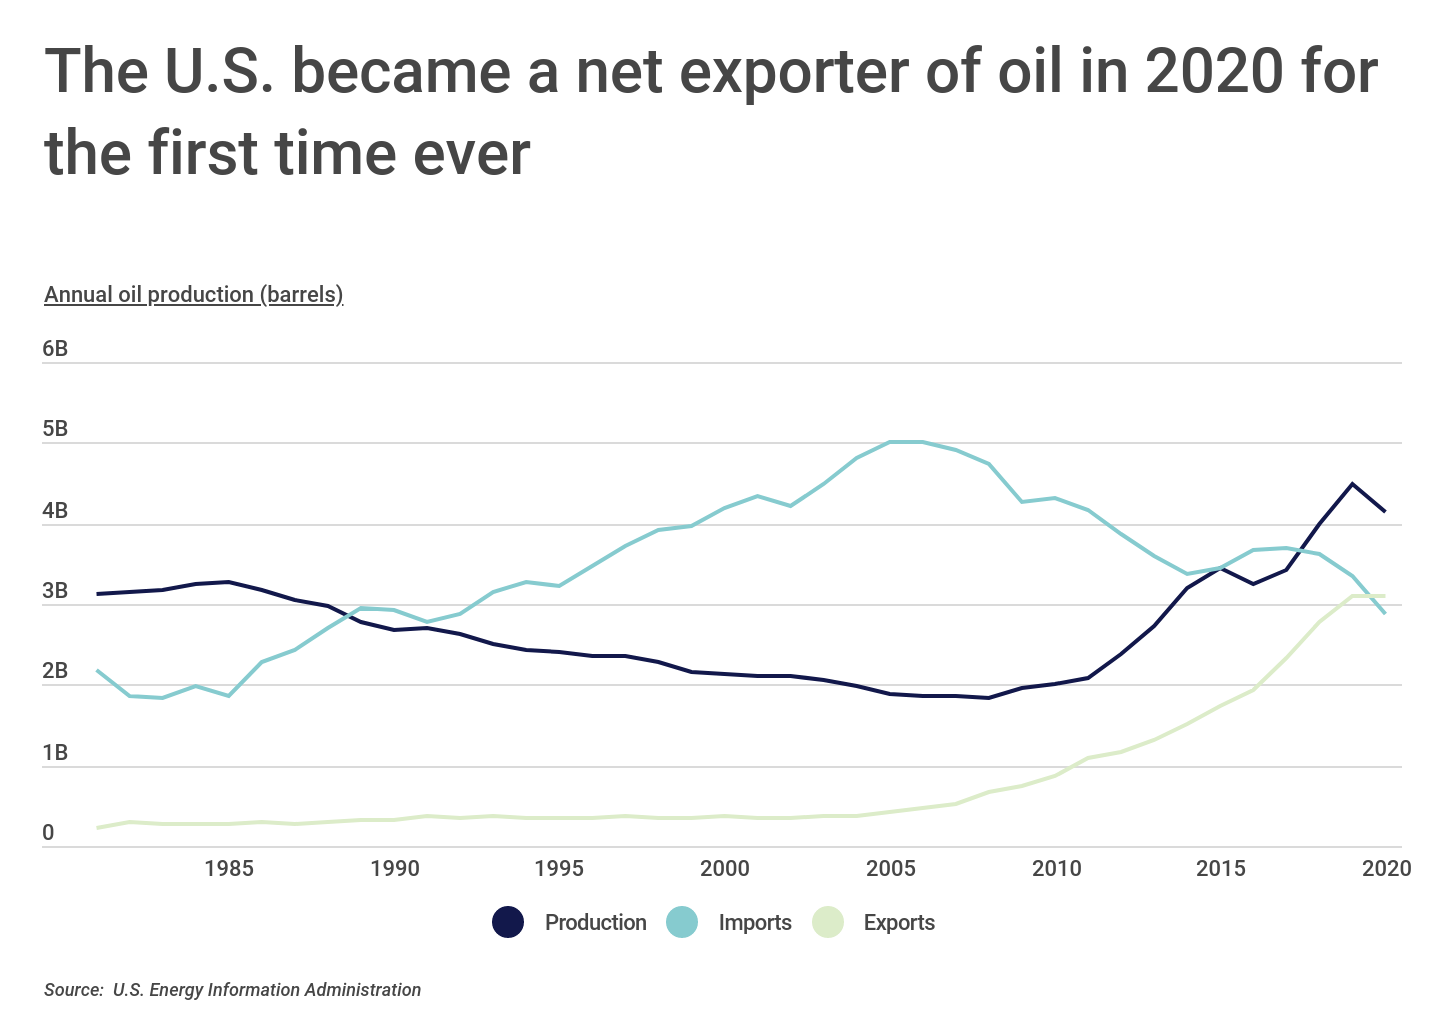 Chart1_The US became a net exporter of oil in 2020 for the first time ever